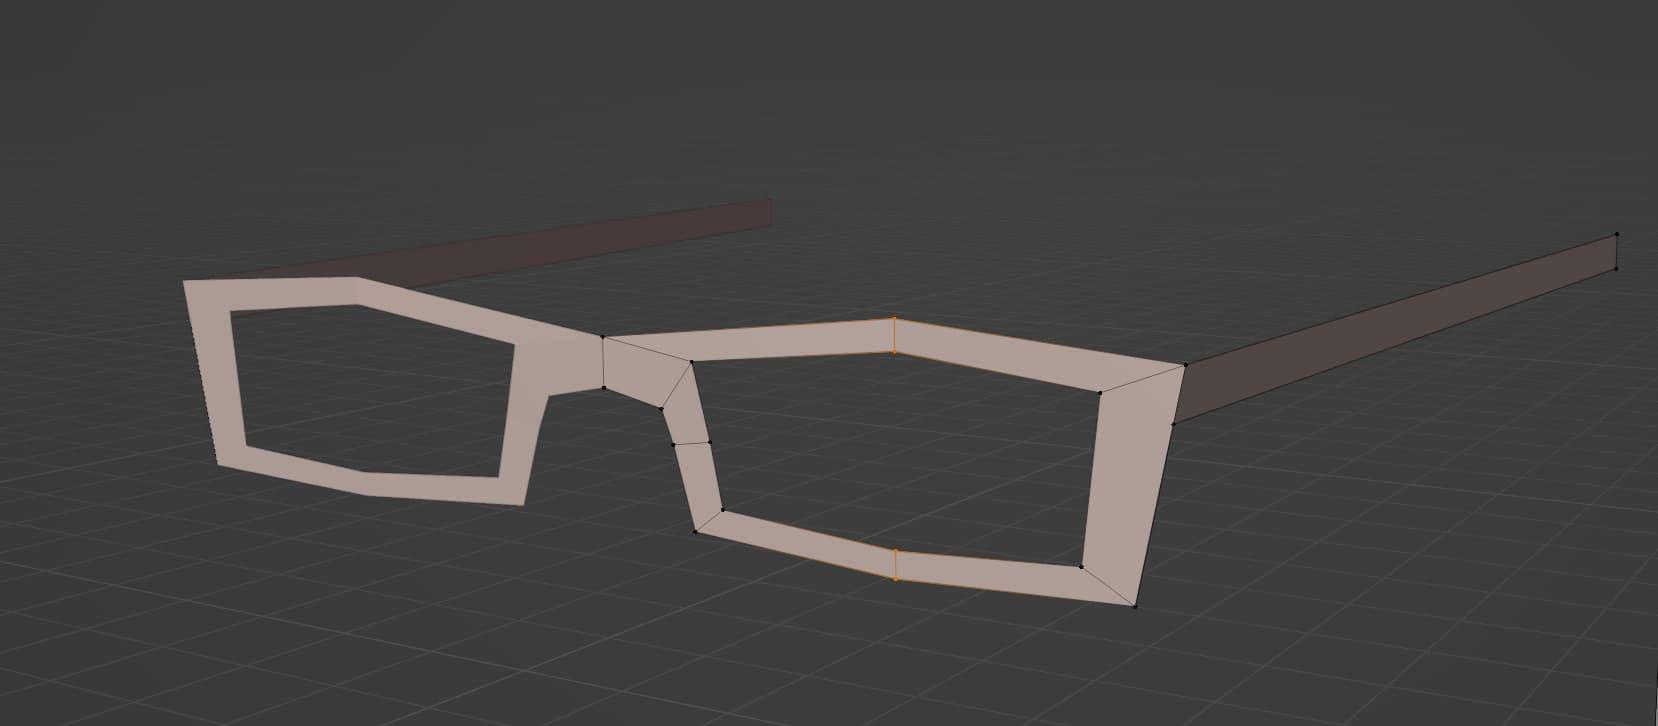 The geometry of the glasses has been fixed and tweaked, and holes have been cut-out where the lenses are presumed to be